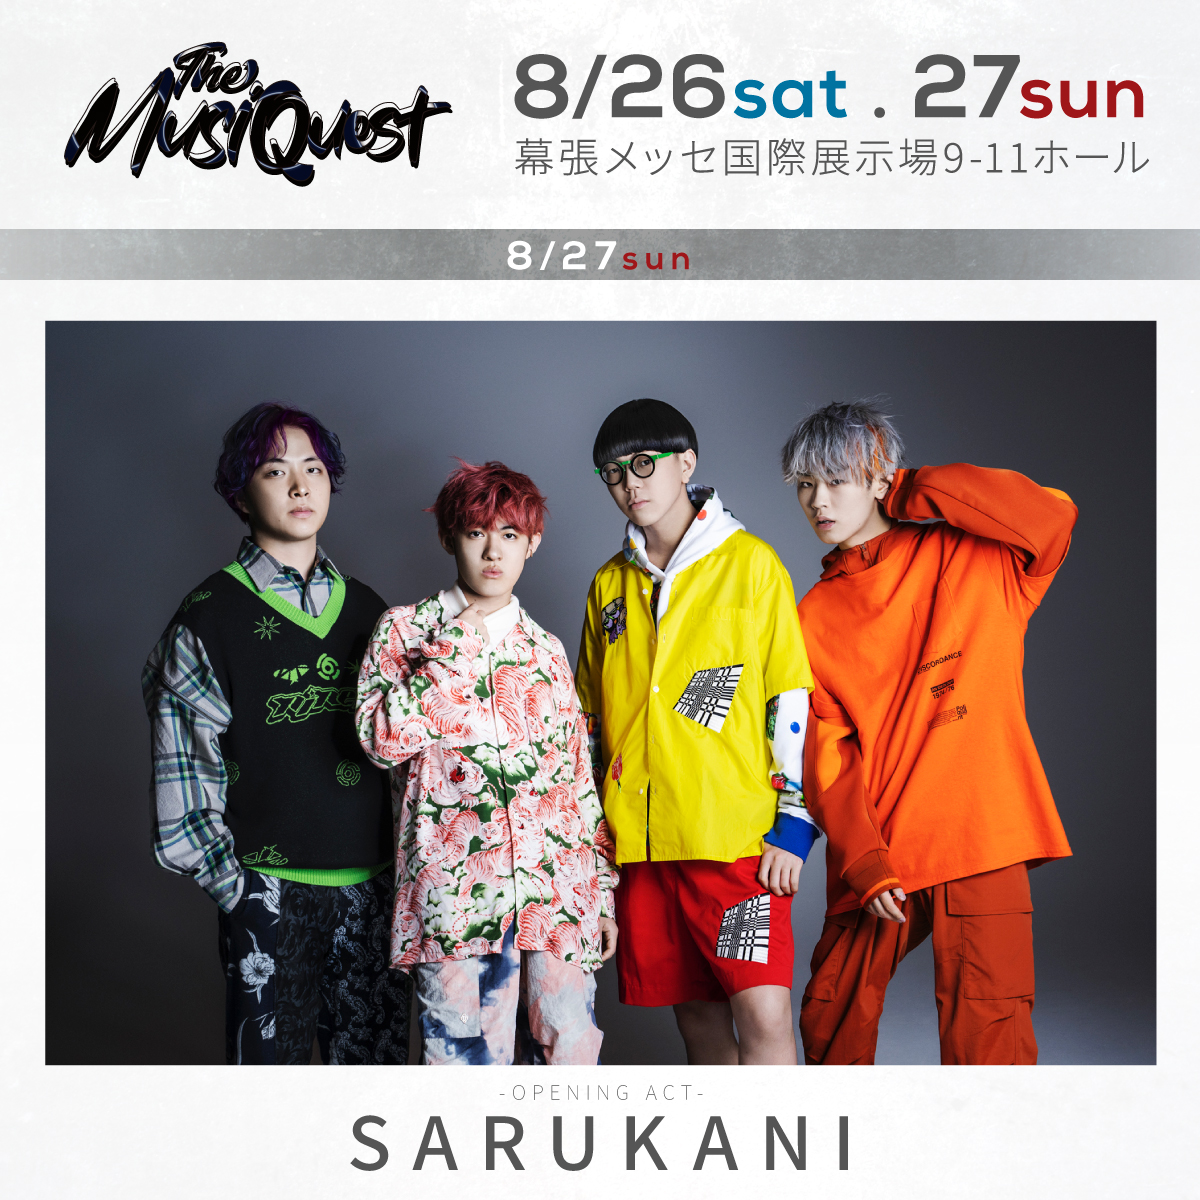 【Performance Ended】August 27 (Sunday) “The MusicQuest”